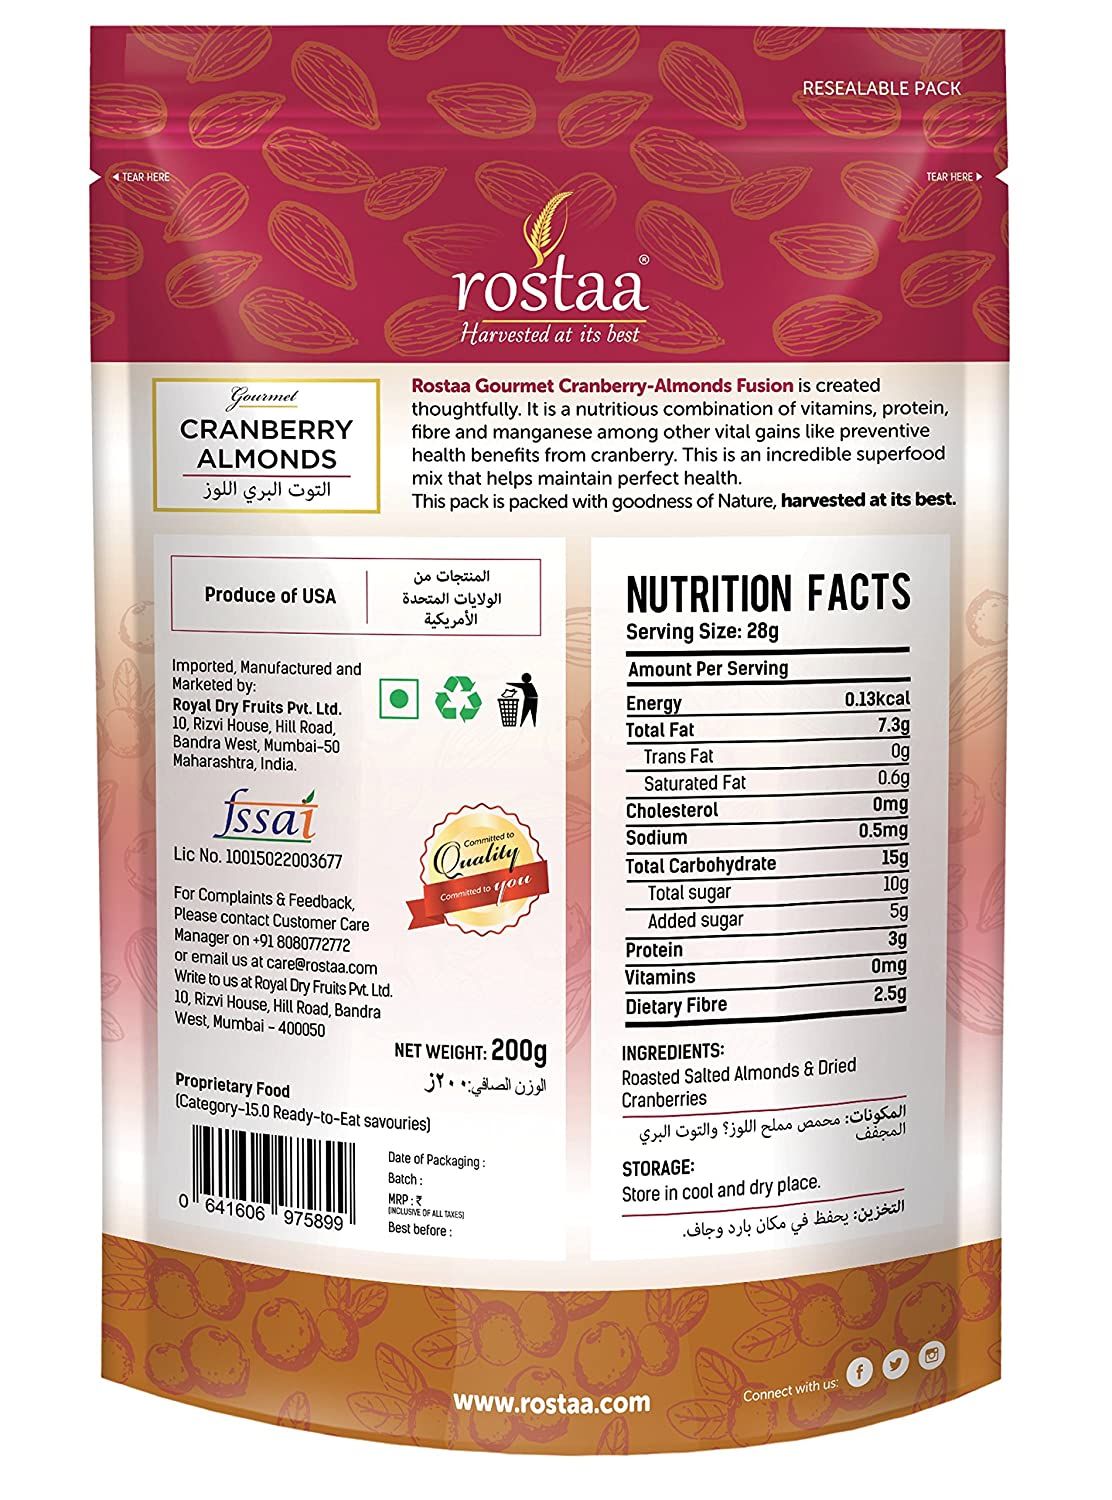 Rostaa Cranberry Almonds Fusion Image